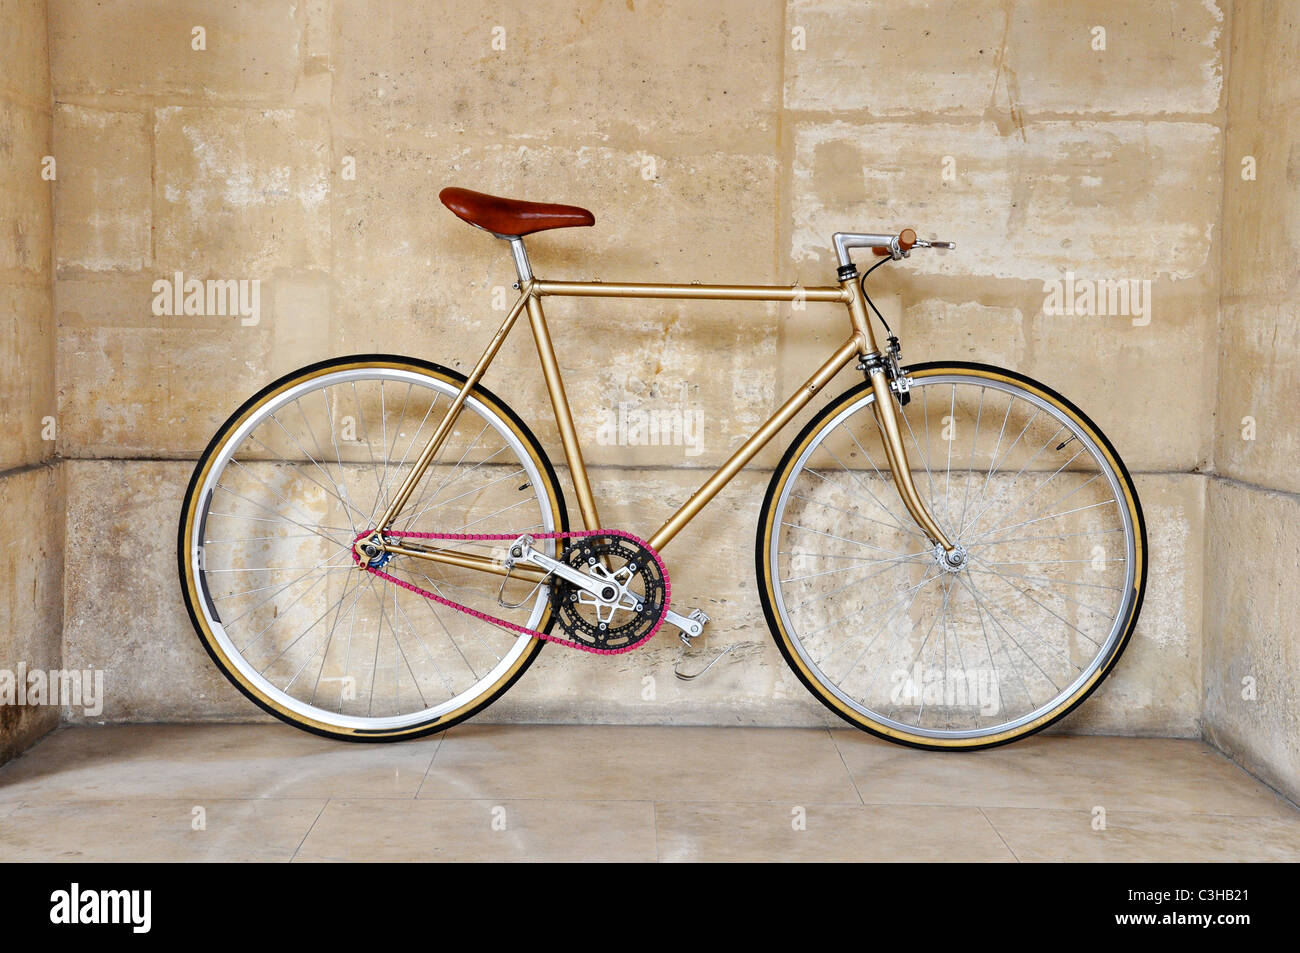 Vintage fixed gear bicycle with a pink chain Stock Photo